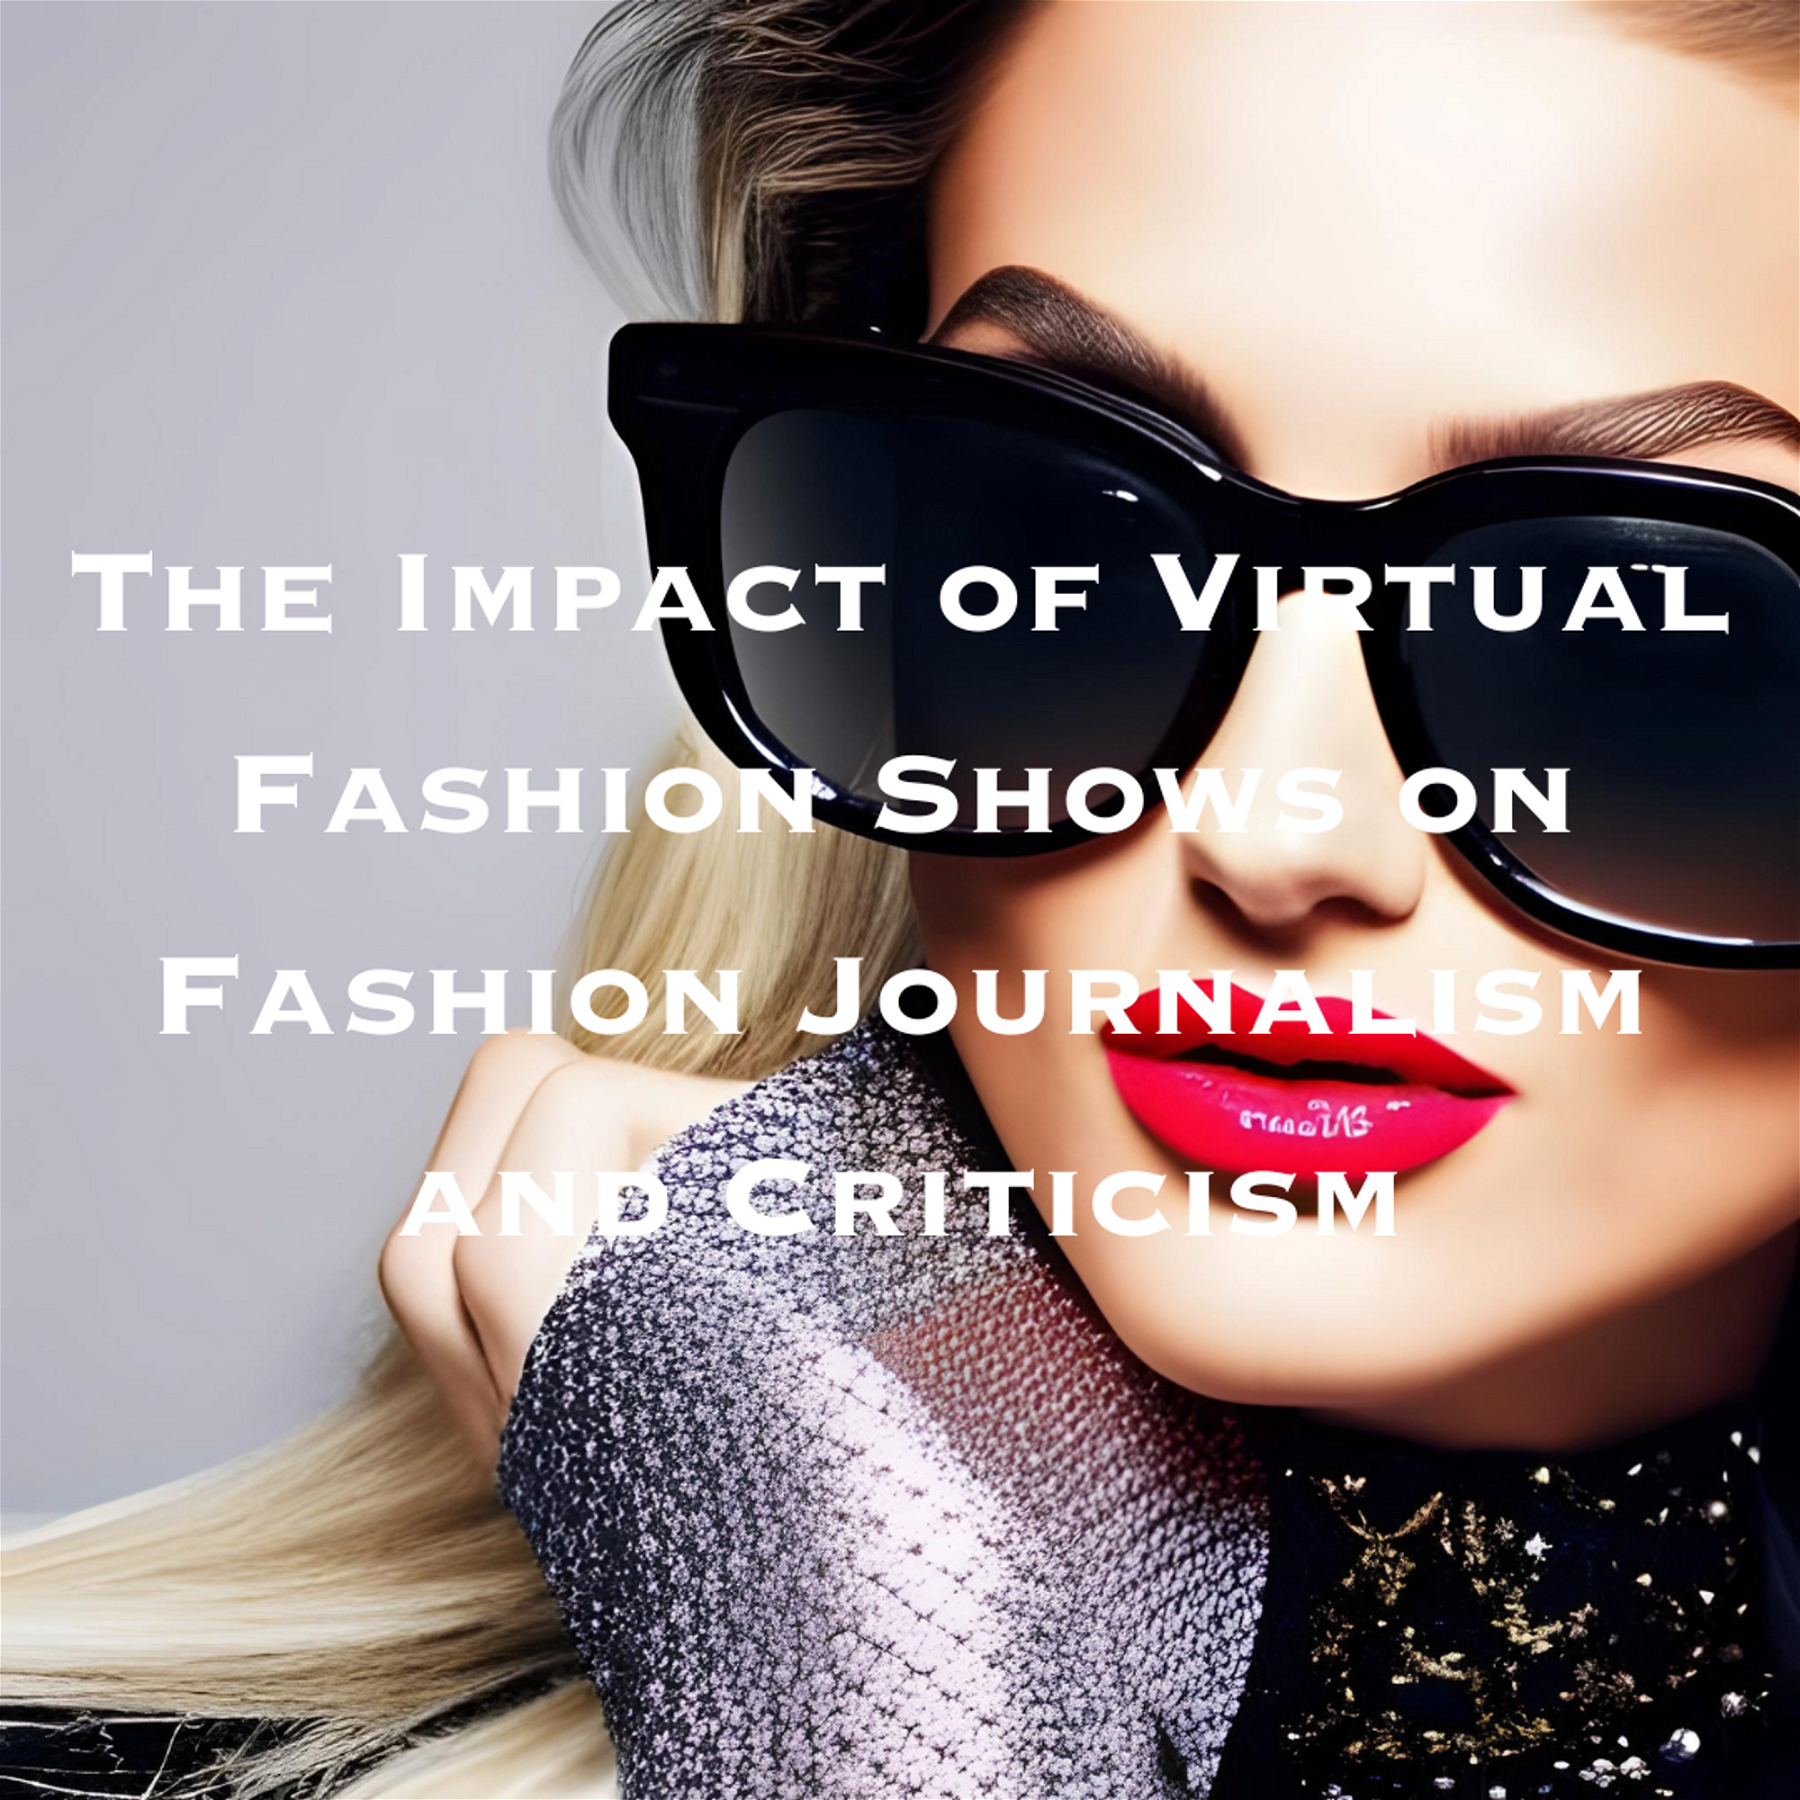 The Impact of Virtual Fashion Shows on Fashion Journalism and Criticism